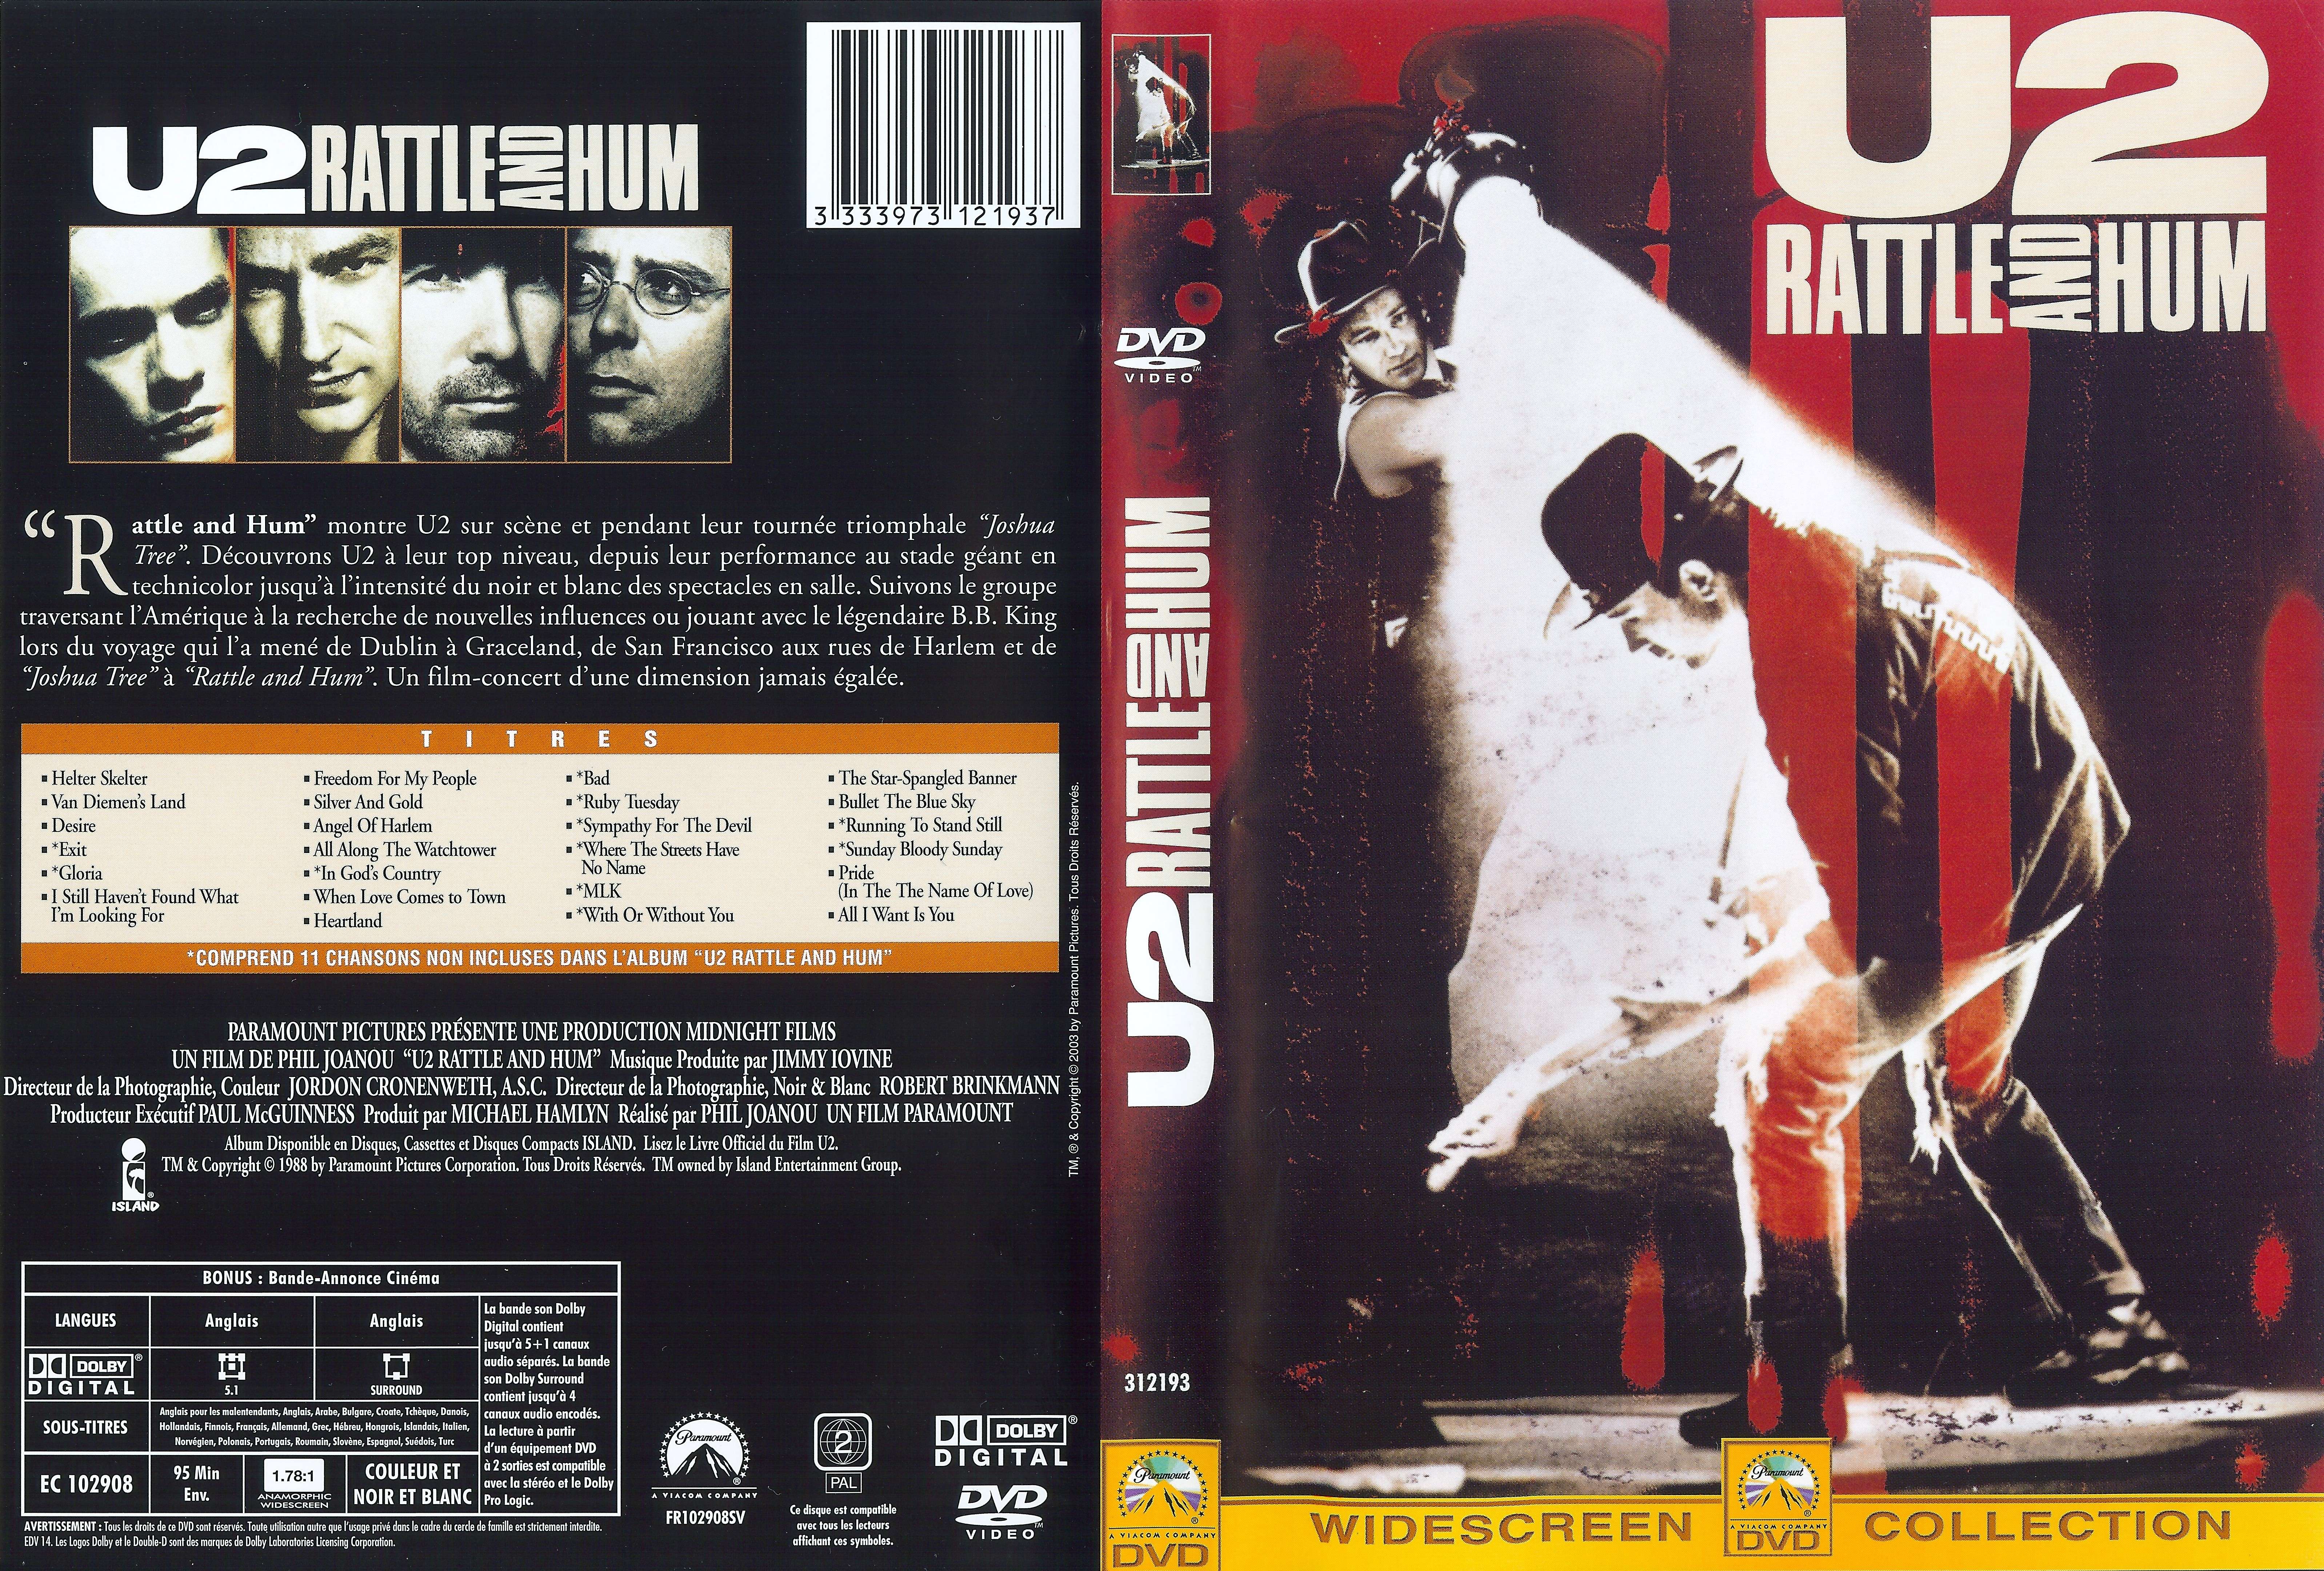 Jaquette DVD U2 Rattle and Hum